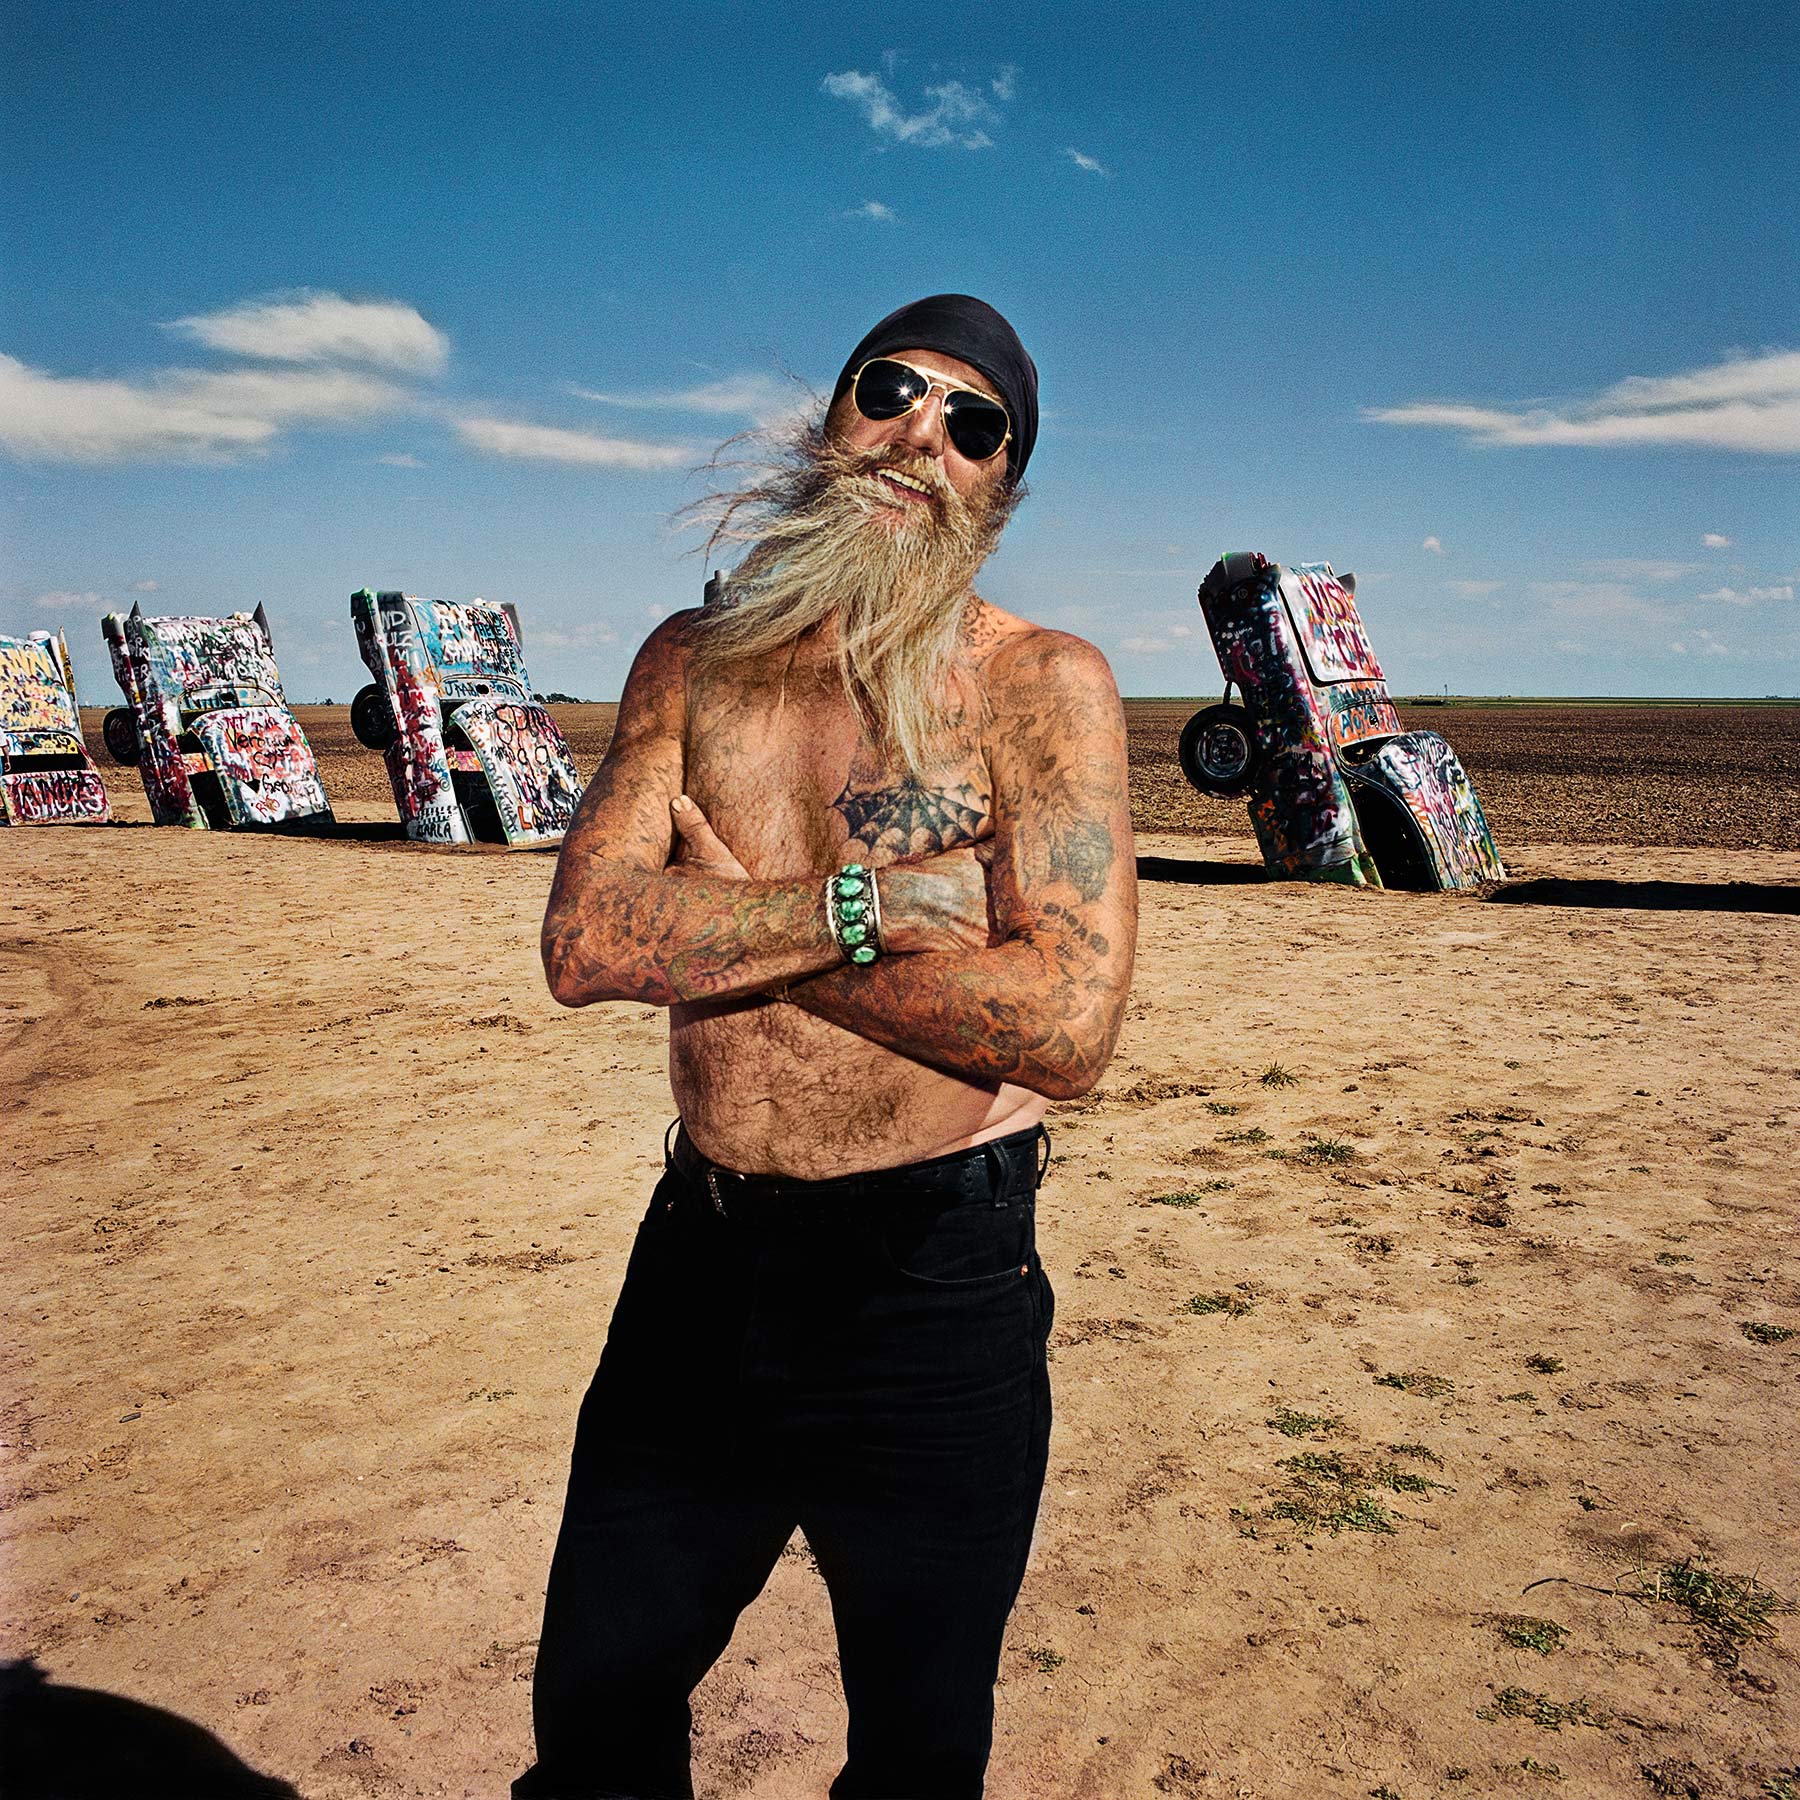 Man with Tattoos at Cadillac Ranch, TX 1998 - Sightseer Series - Photo by Roger Minick